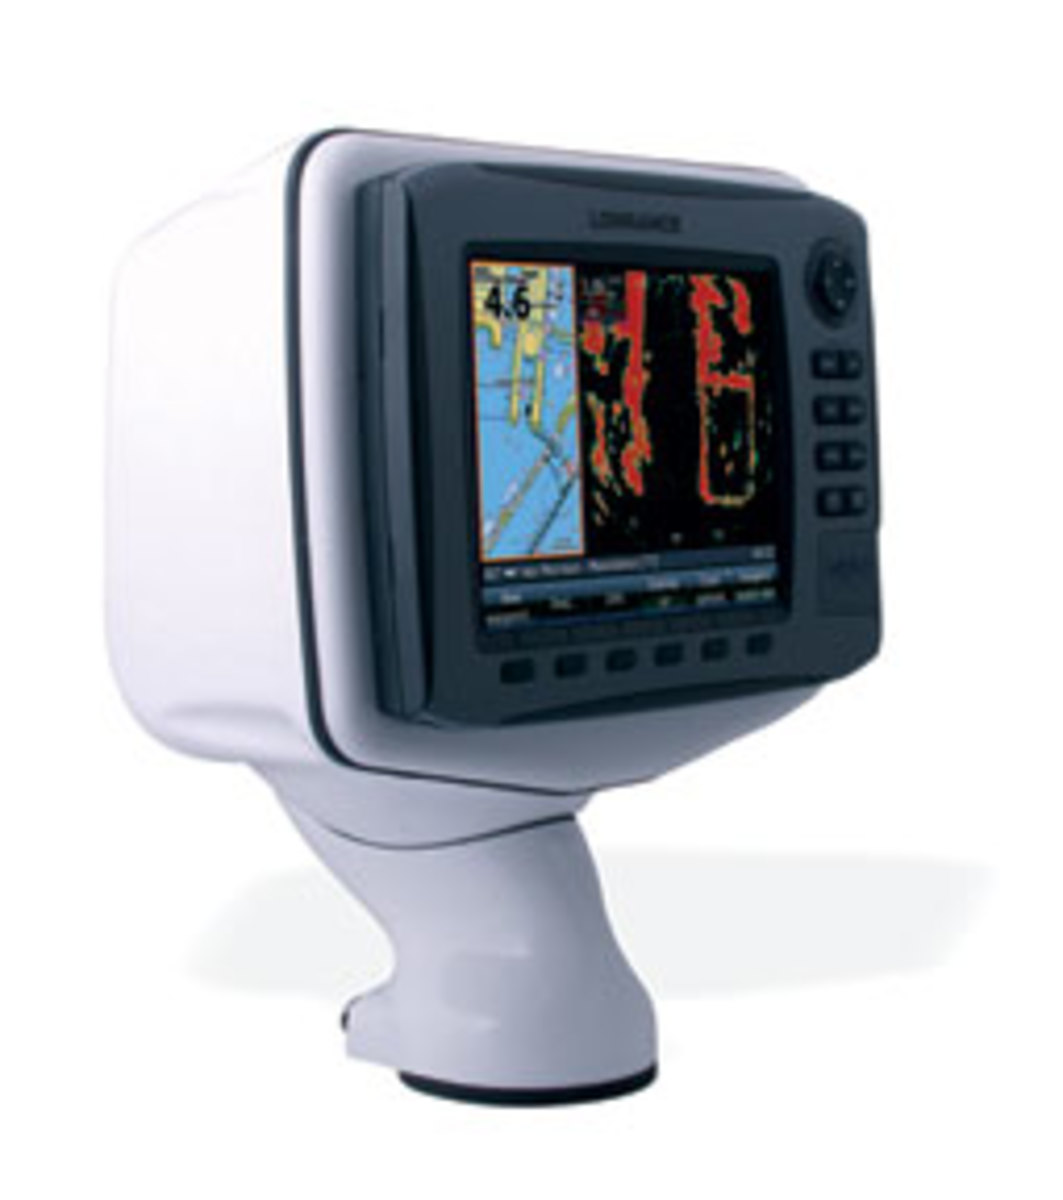 A Seaview Pod allows the display to be mounted without cutting an opening in the helm.